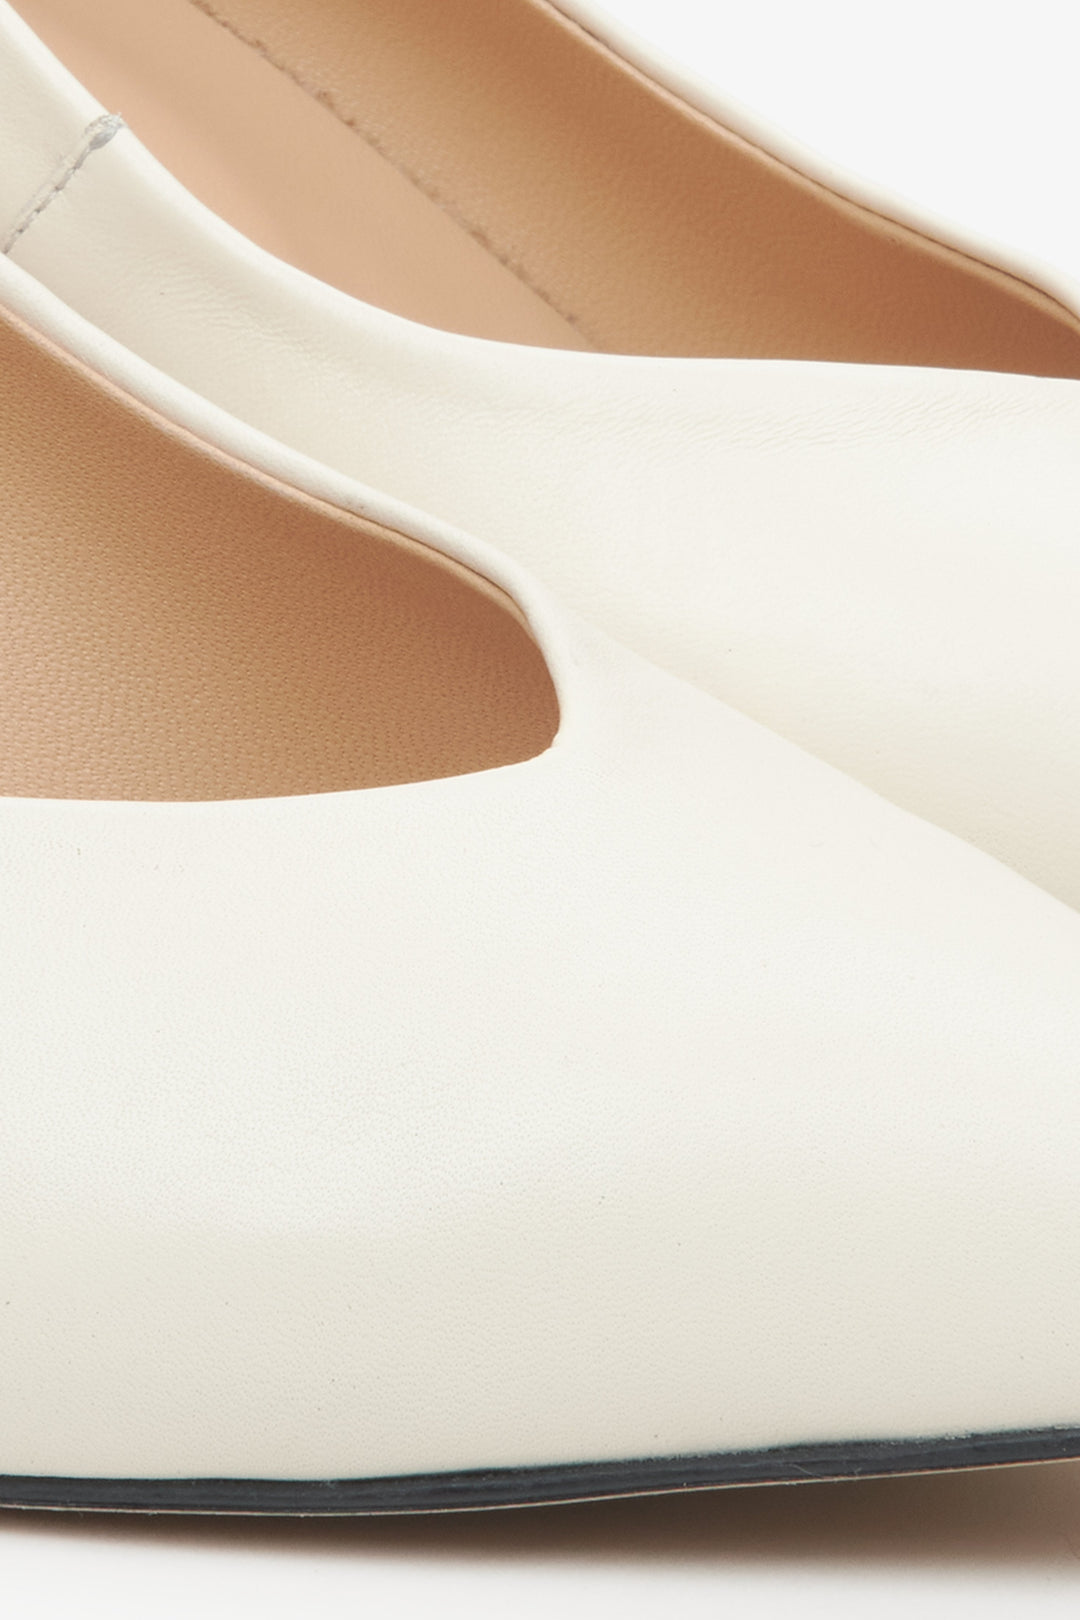 Women's cream-beige leather pumps - close-up on the detail.